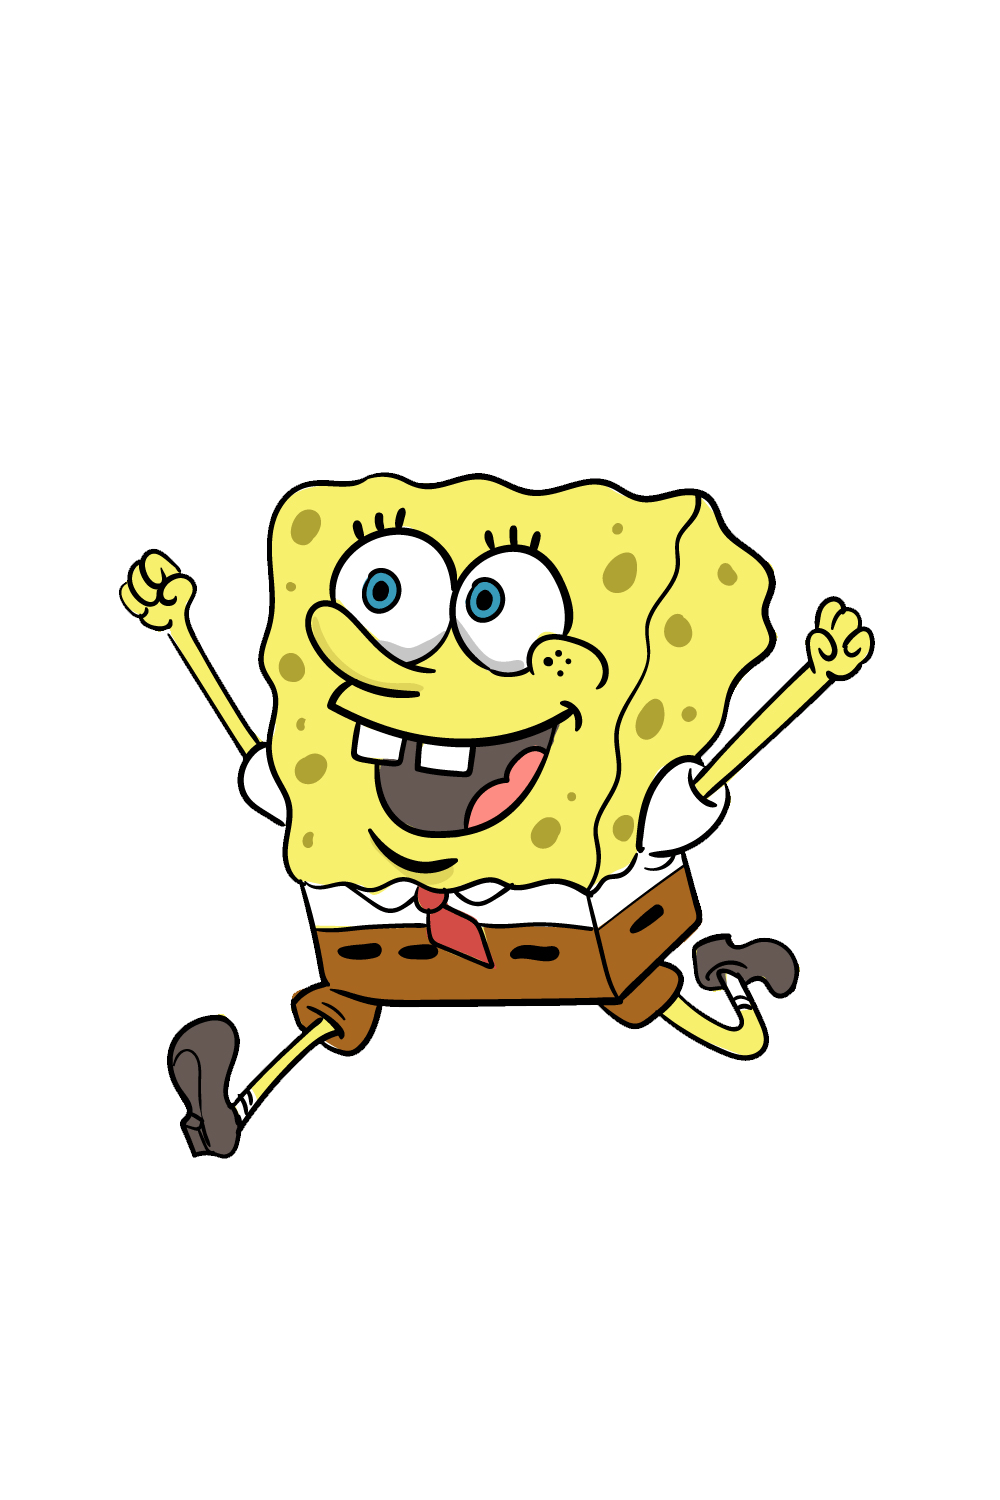 How to Draw Spongebob Drawing || Step by Step Tutorial